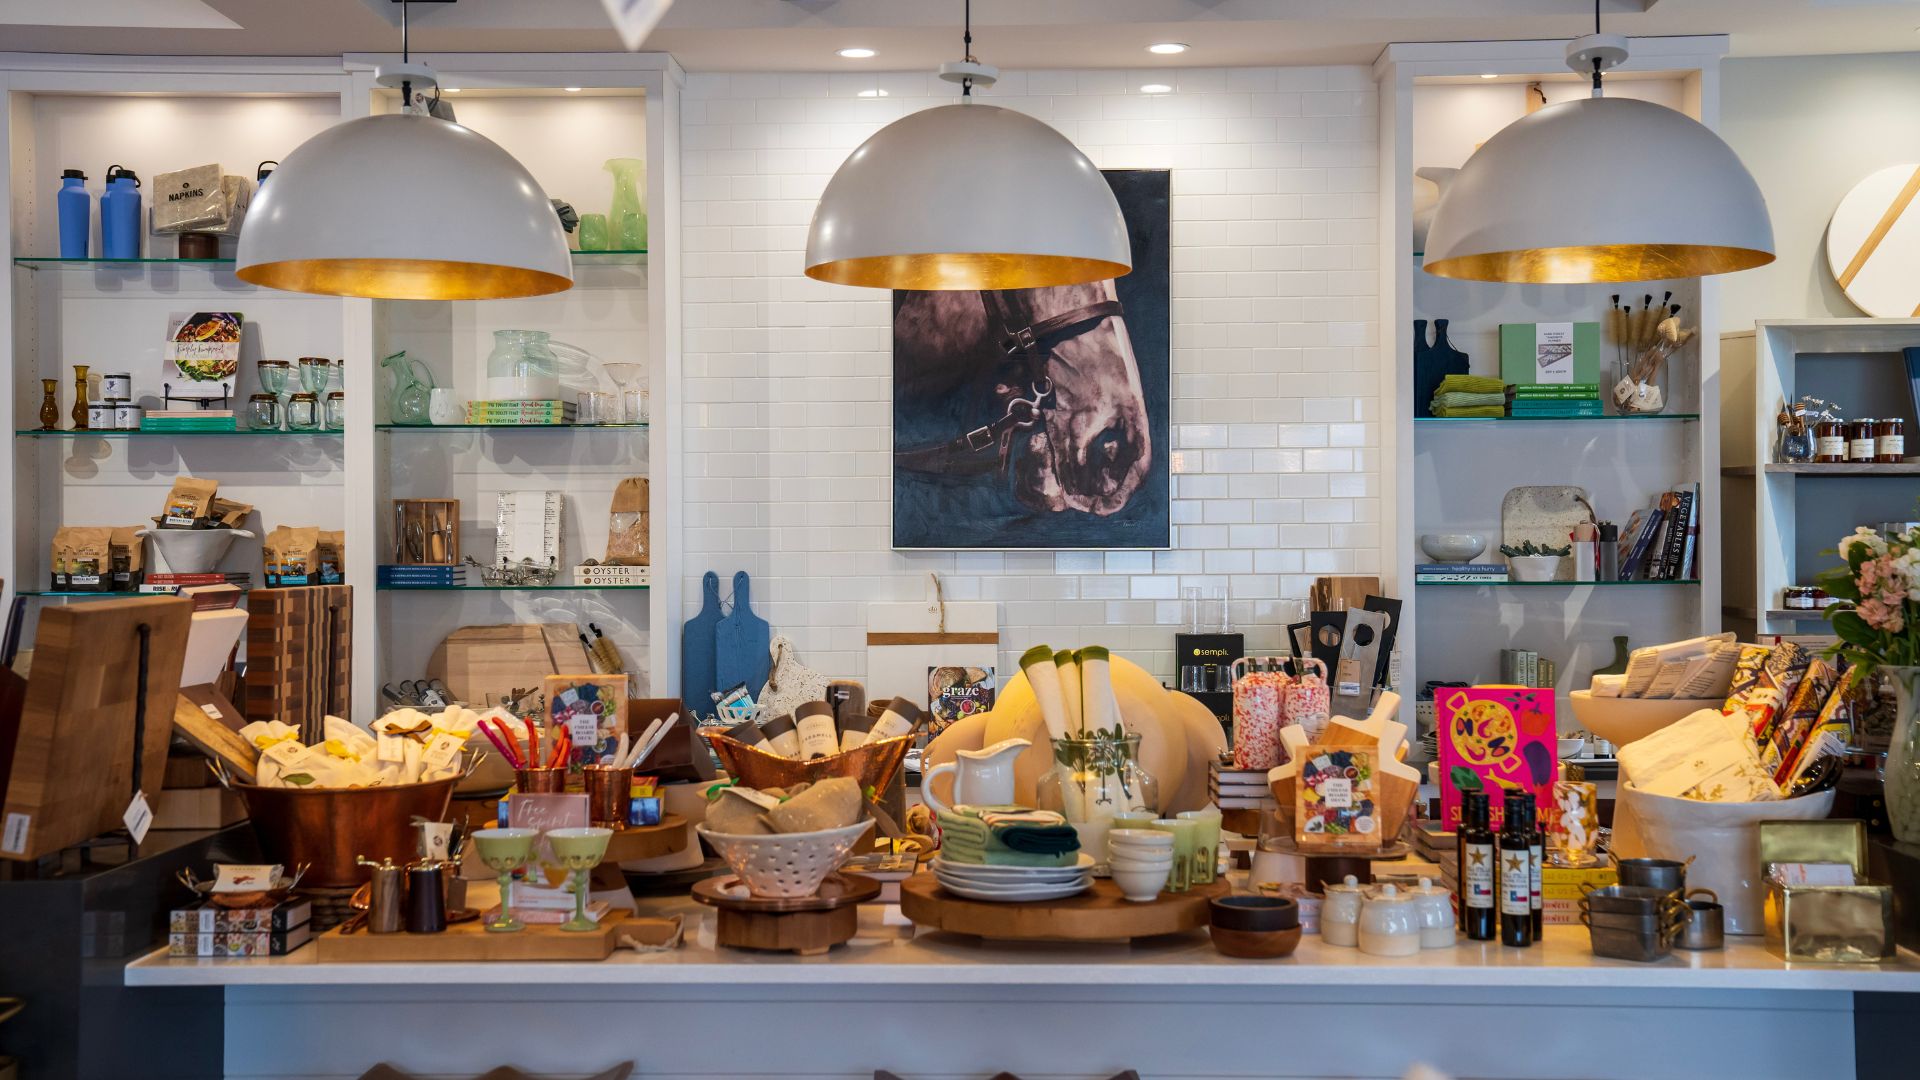 In the kitchen at Hearth & Soul, you can shop for kitchen gadgets, tableware, tea towels and more. 